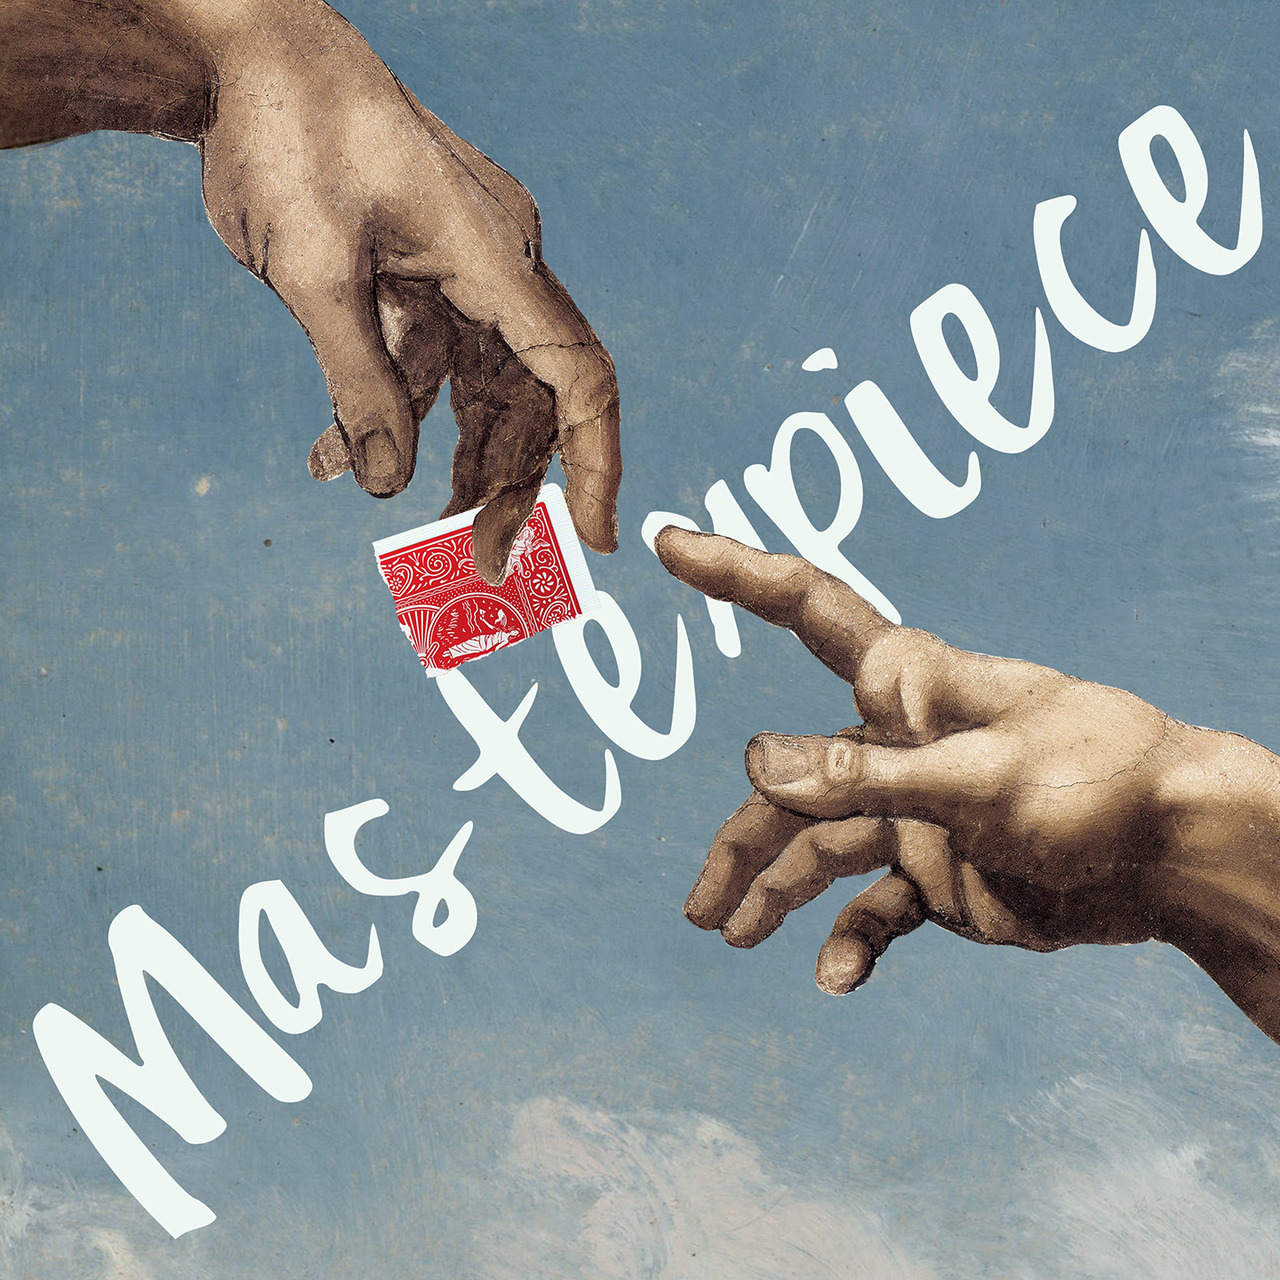 Masterpiece by Rick Lax (Instant Download)